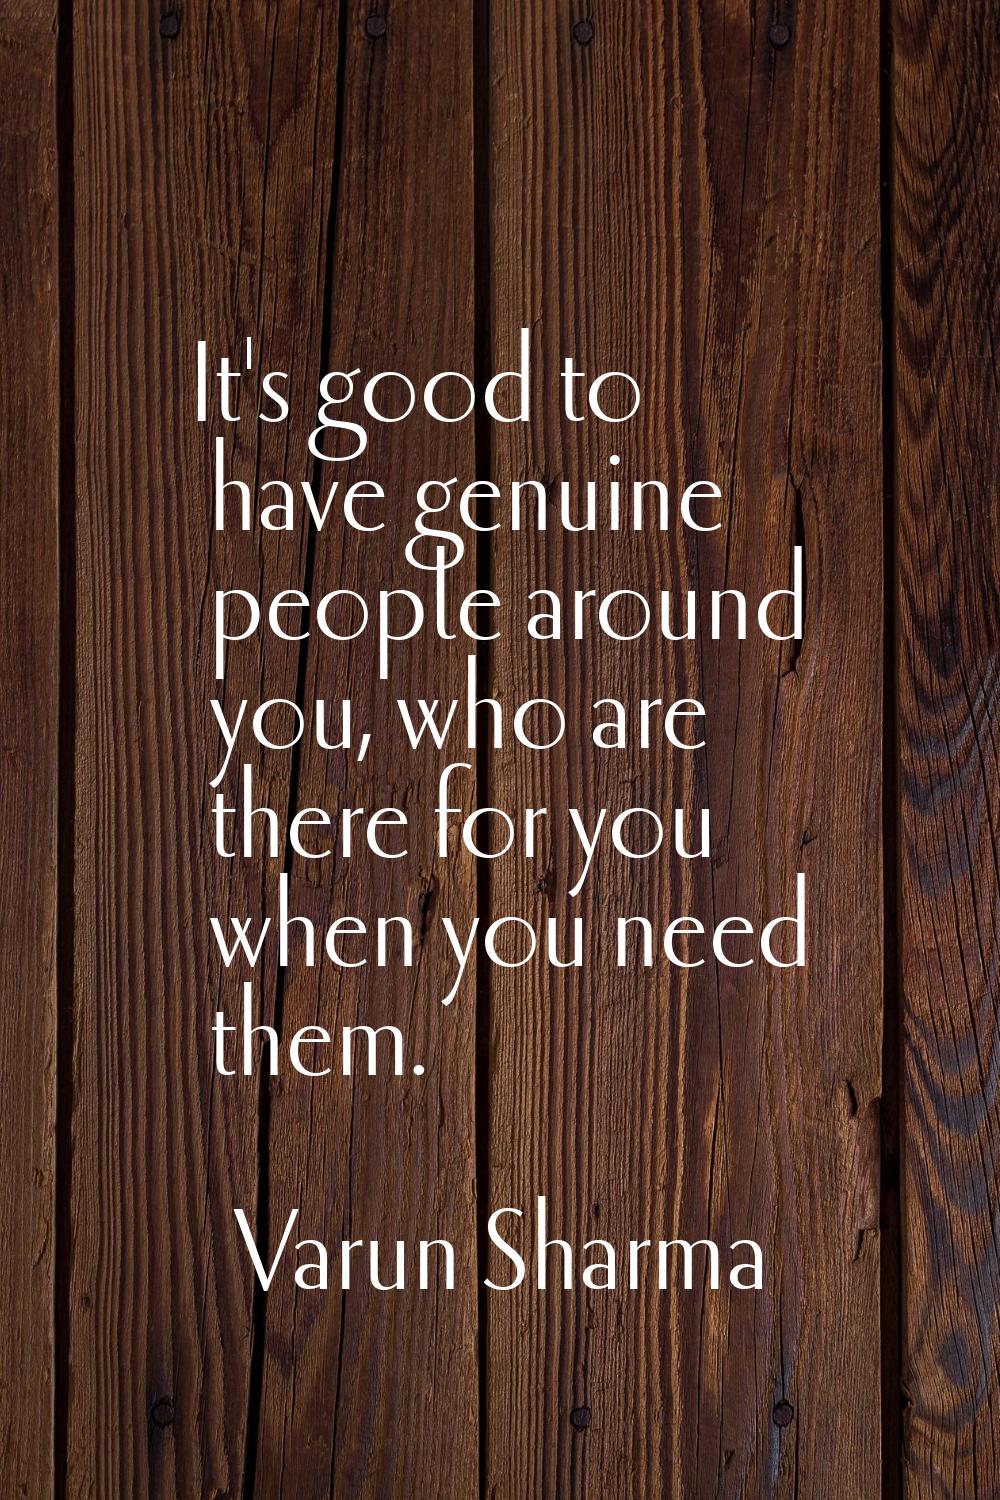 It's good to have genuine people around you, who are there for you when you need them.